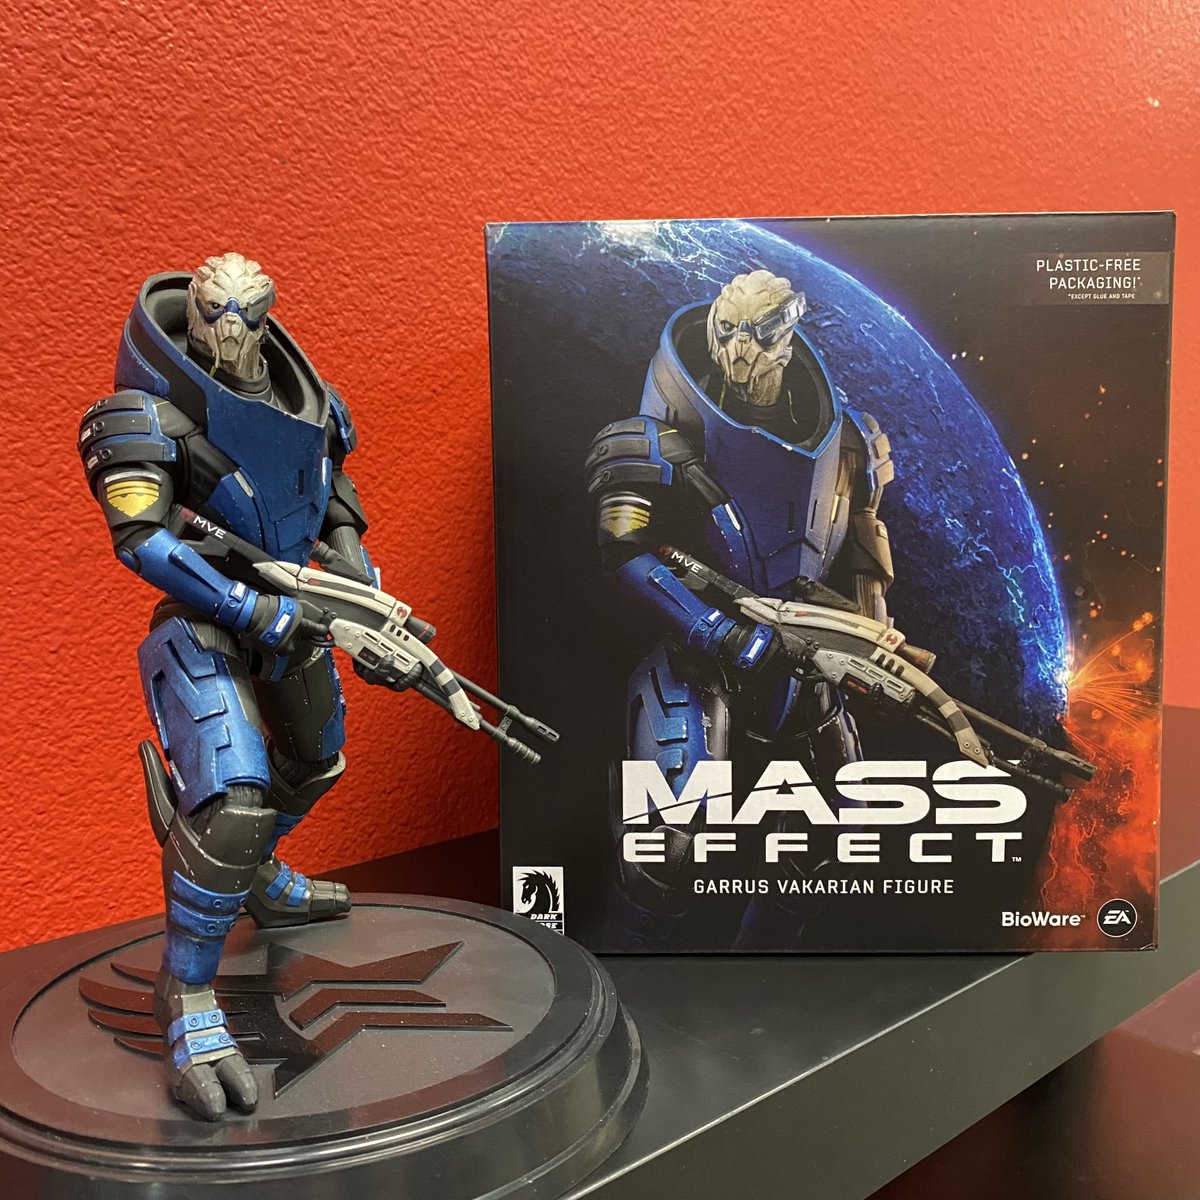 The tactical Turian sniper! Get ready to add one of Mass Effect’s most beloved characters to your collection. Don’t miss out on the 9-inch tall Garrus Vakarian figure. Pre-order now!

@DarkHorseComics #BioWare #MassEffect #Garrus